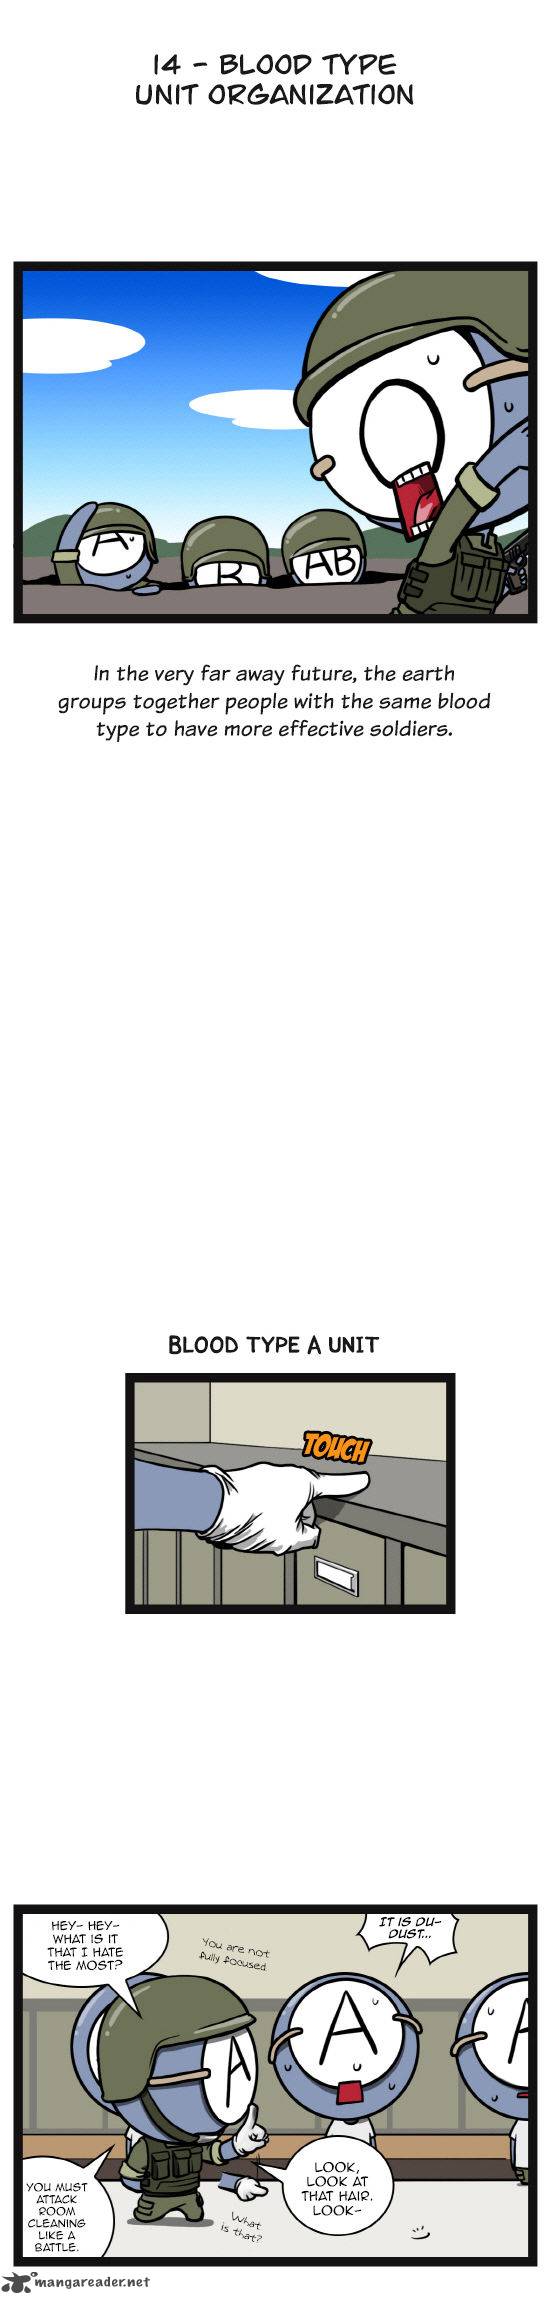 A Simple Thinking About Blood Types 14 2